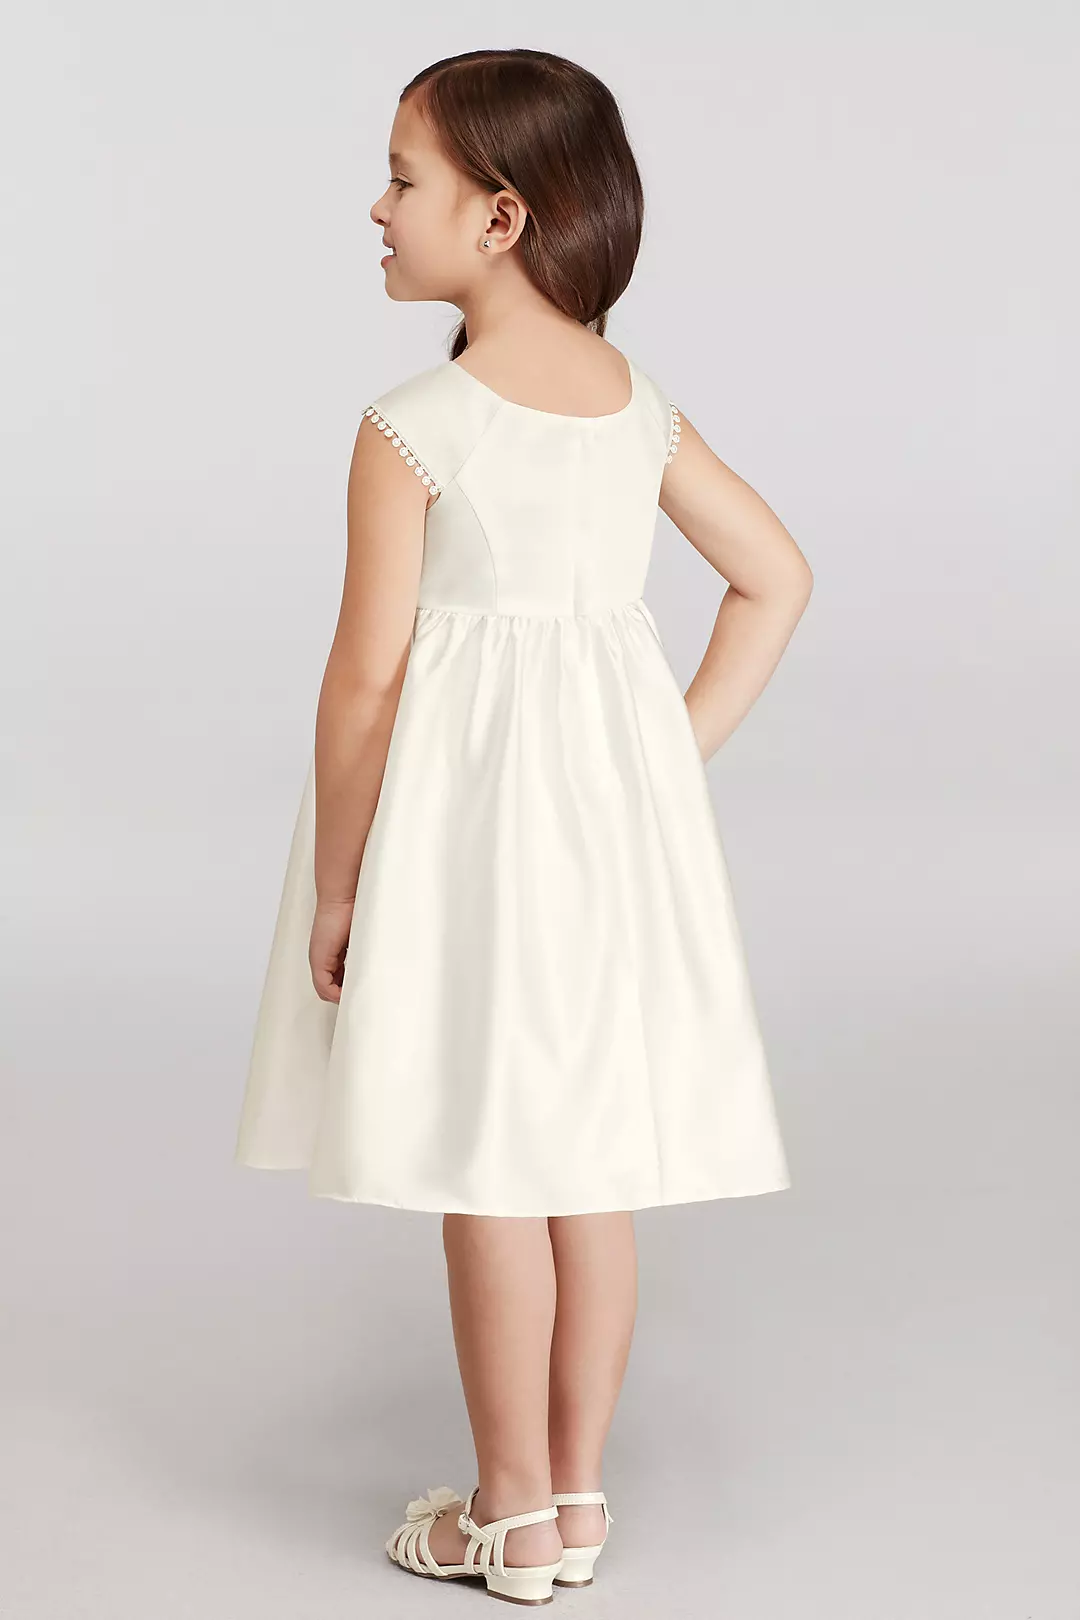 Cap Sleeve Flower Girl Dress with Lace Appliques Image 2